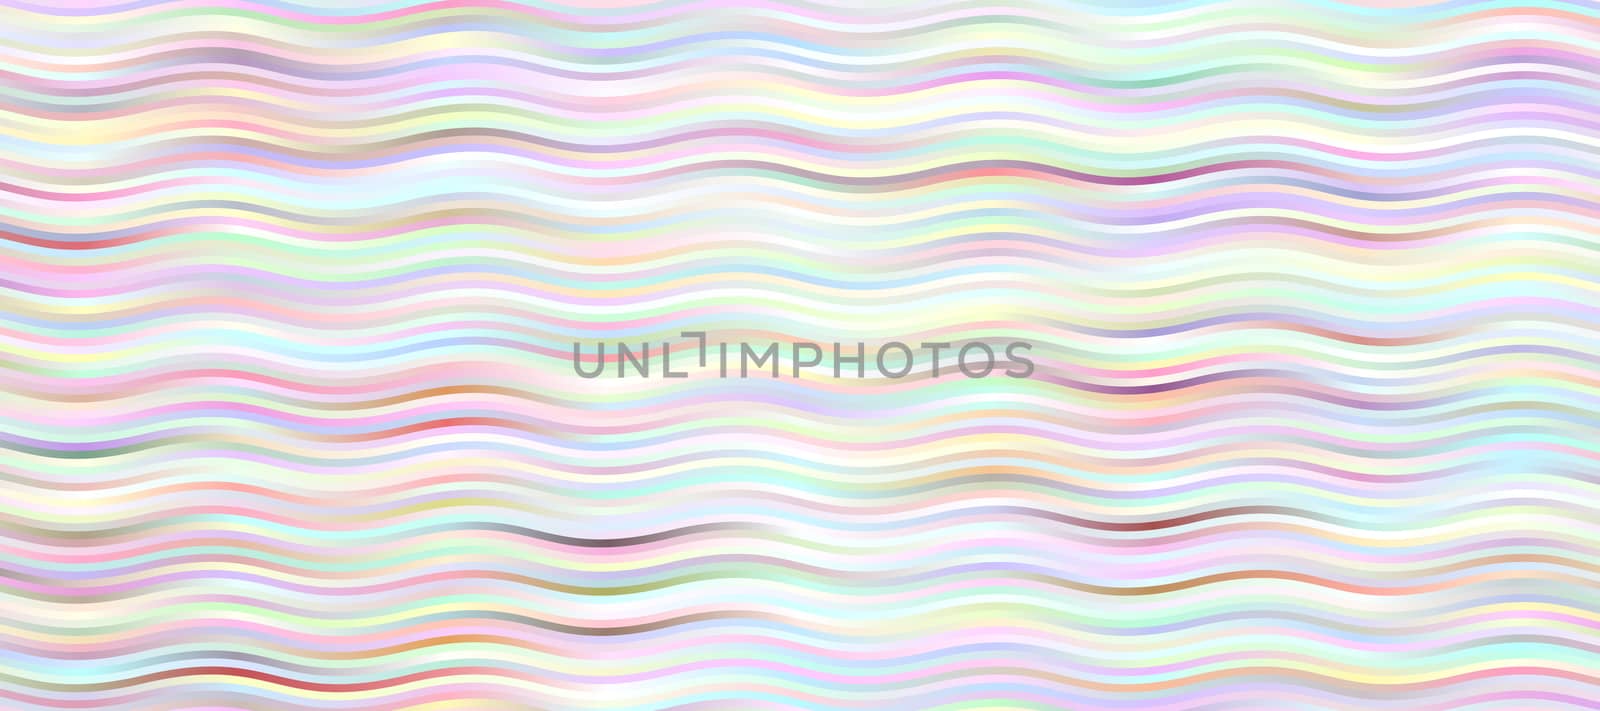 Abstract wavy lines background, gradient pastel color tones